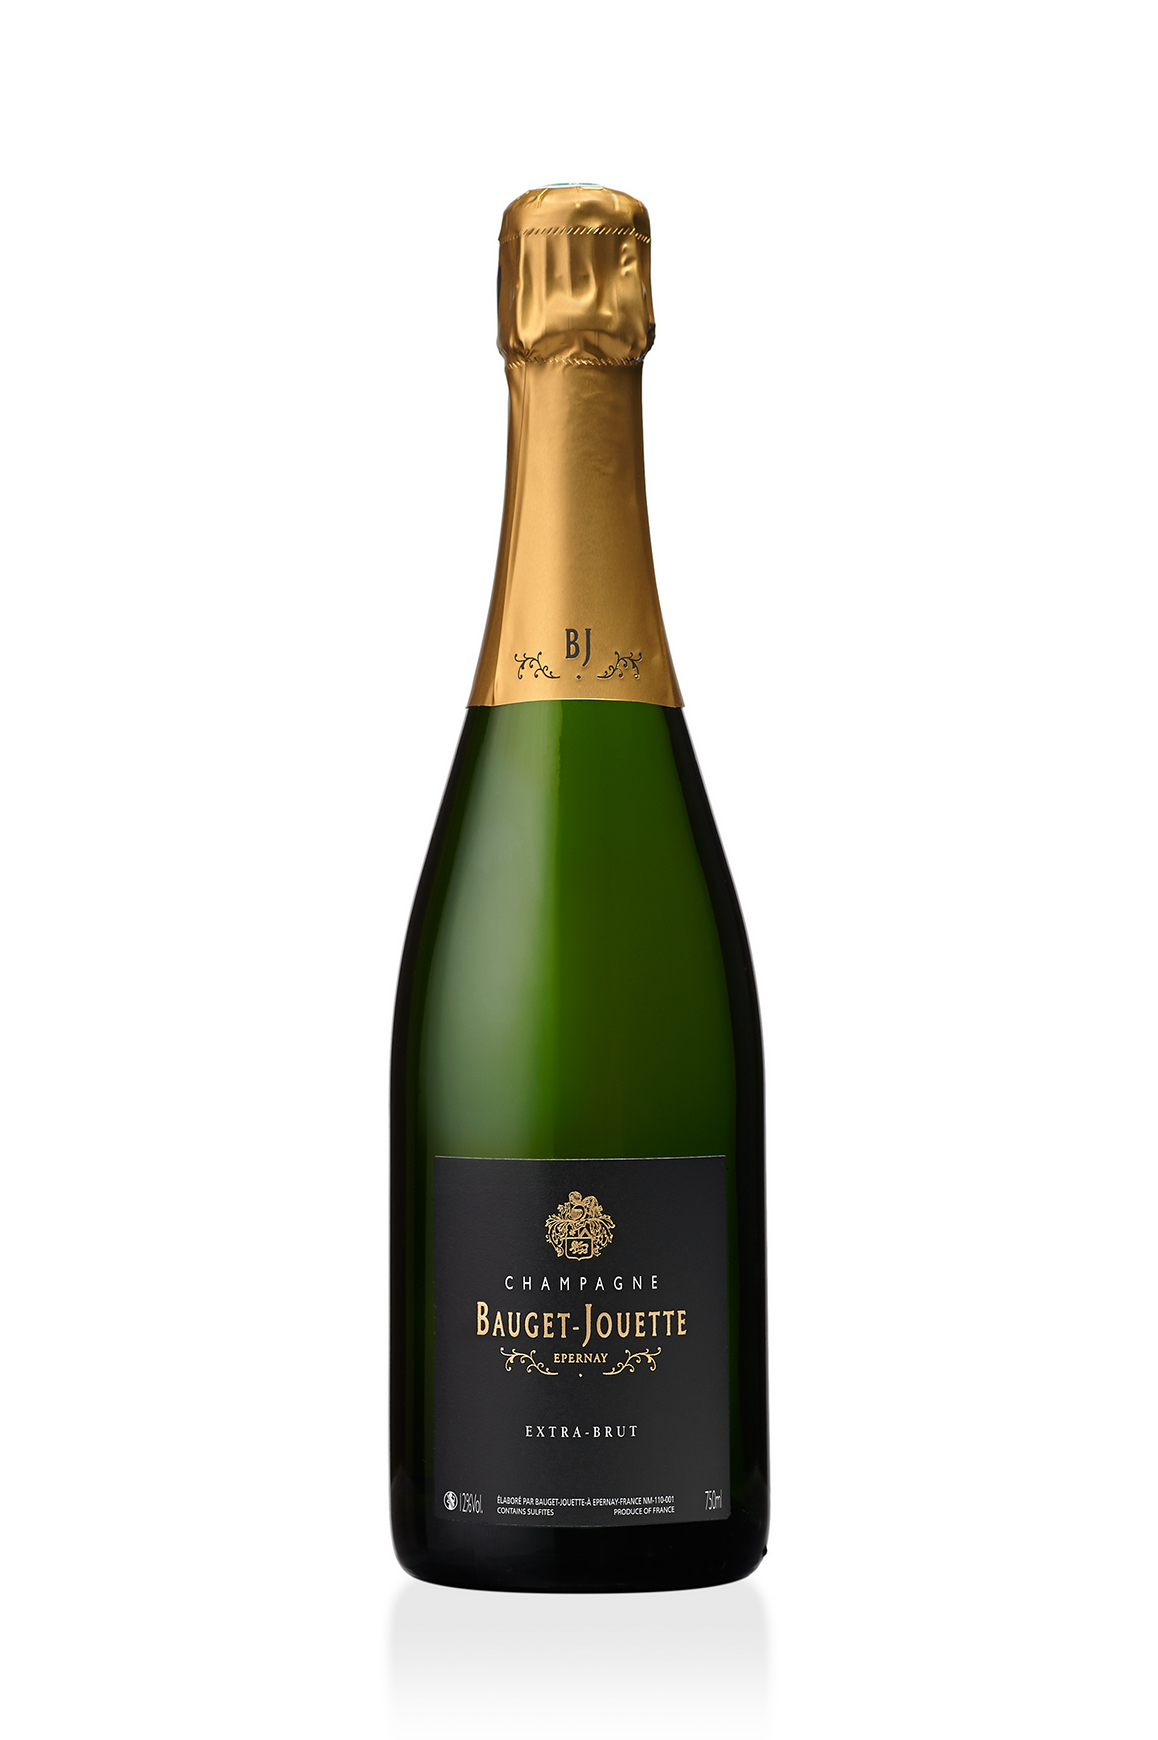 Extra Brut Champagne Bauget-Jouette